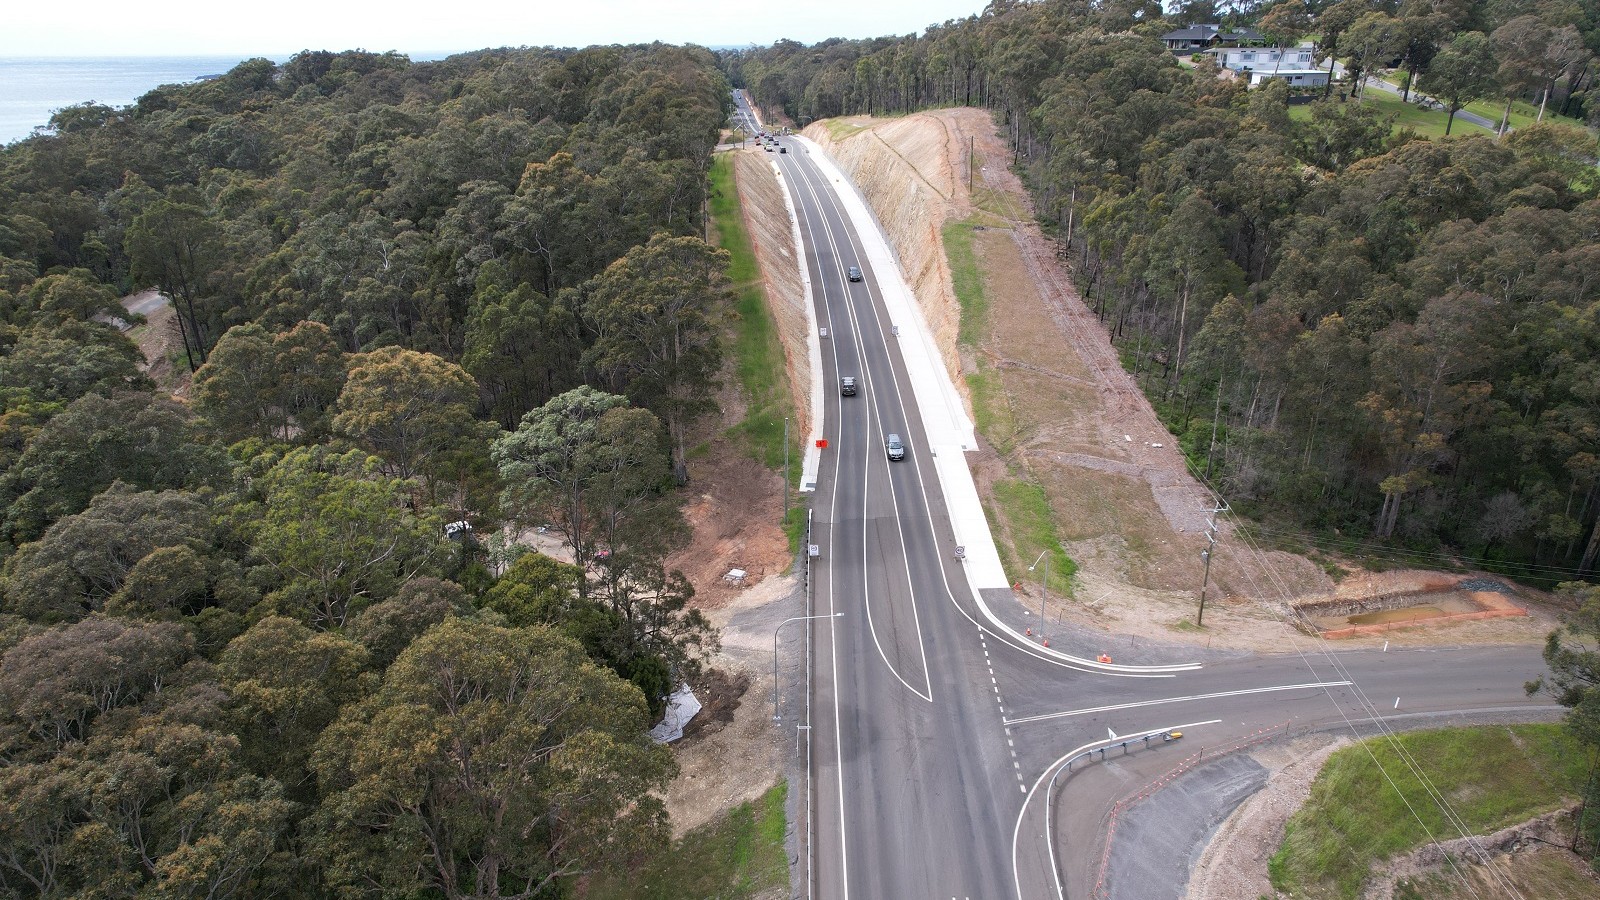 Image A drone photo shows a new straight road through bushland